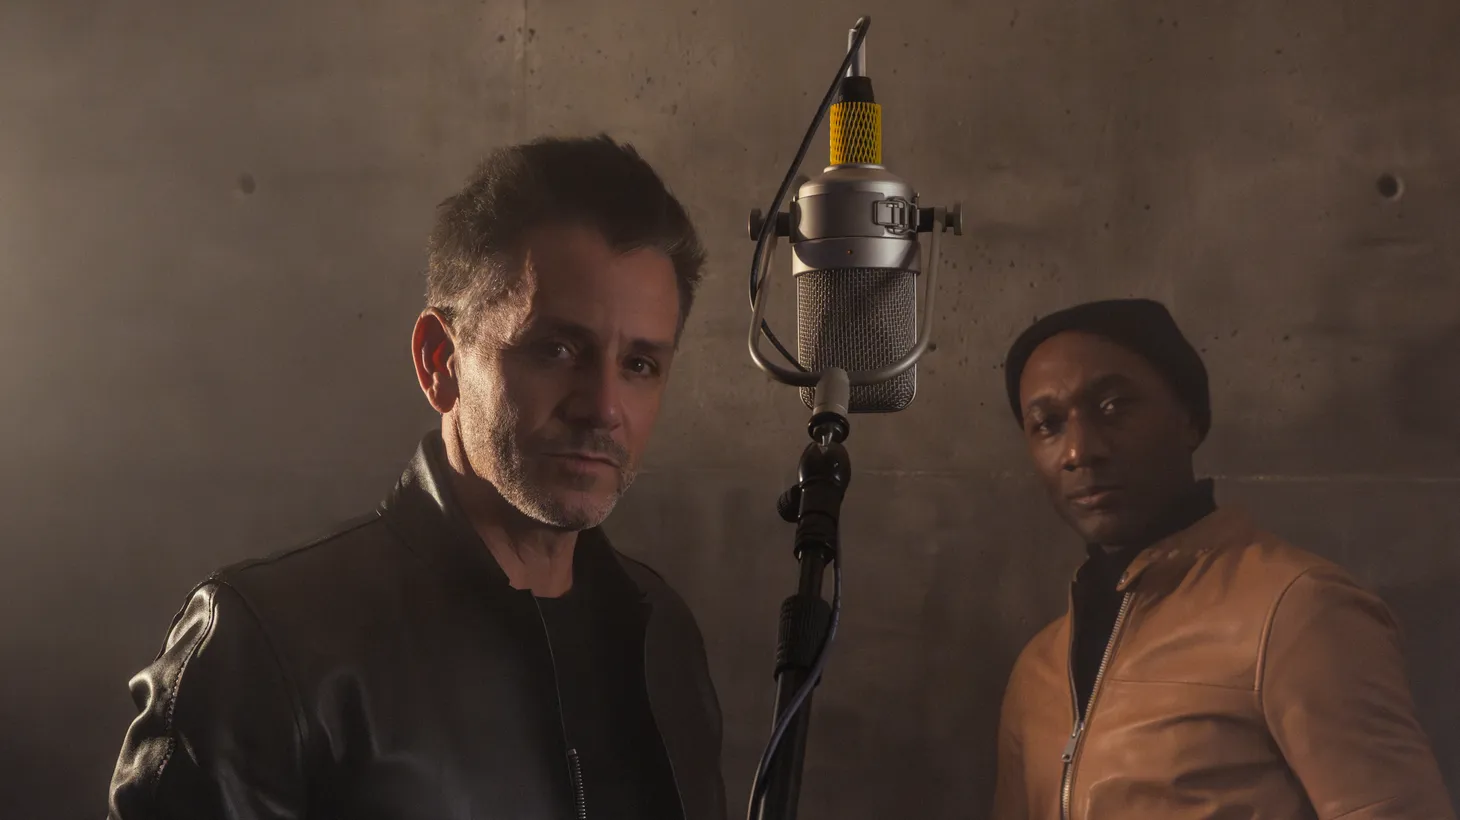 In honor of Dry January, let’s turn to a song about sobriety, written by Eric Hirshberg and featuring an artist close to our hearts, Aloe Blacc.